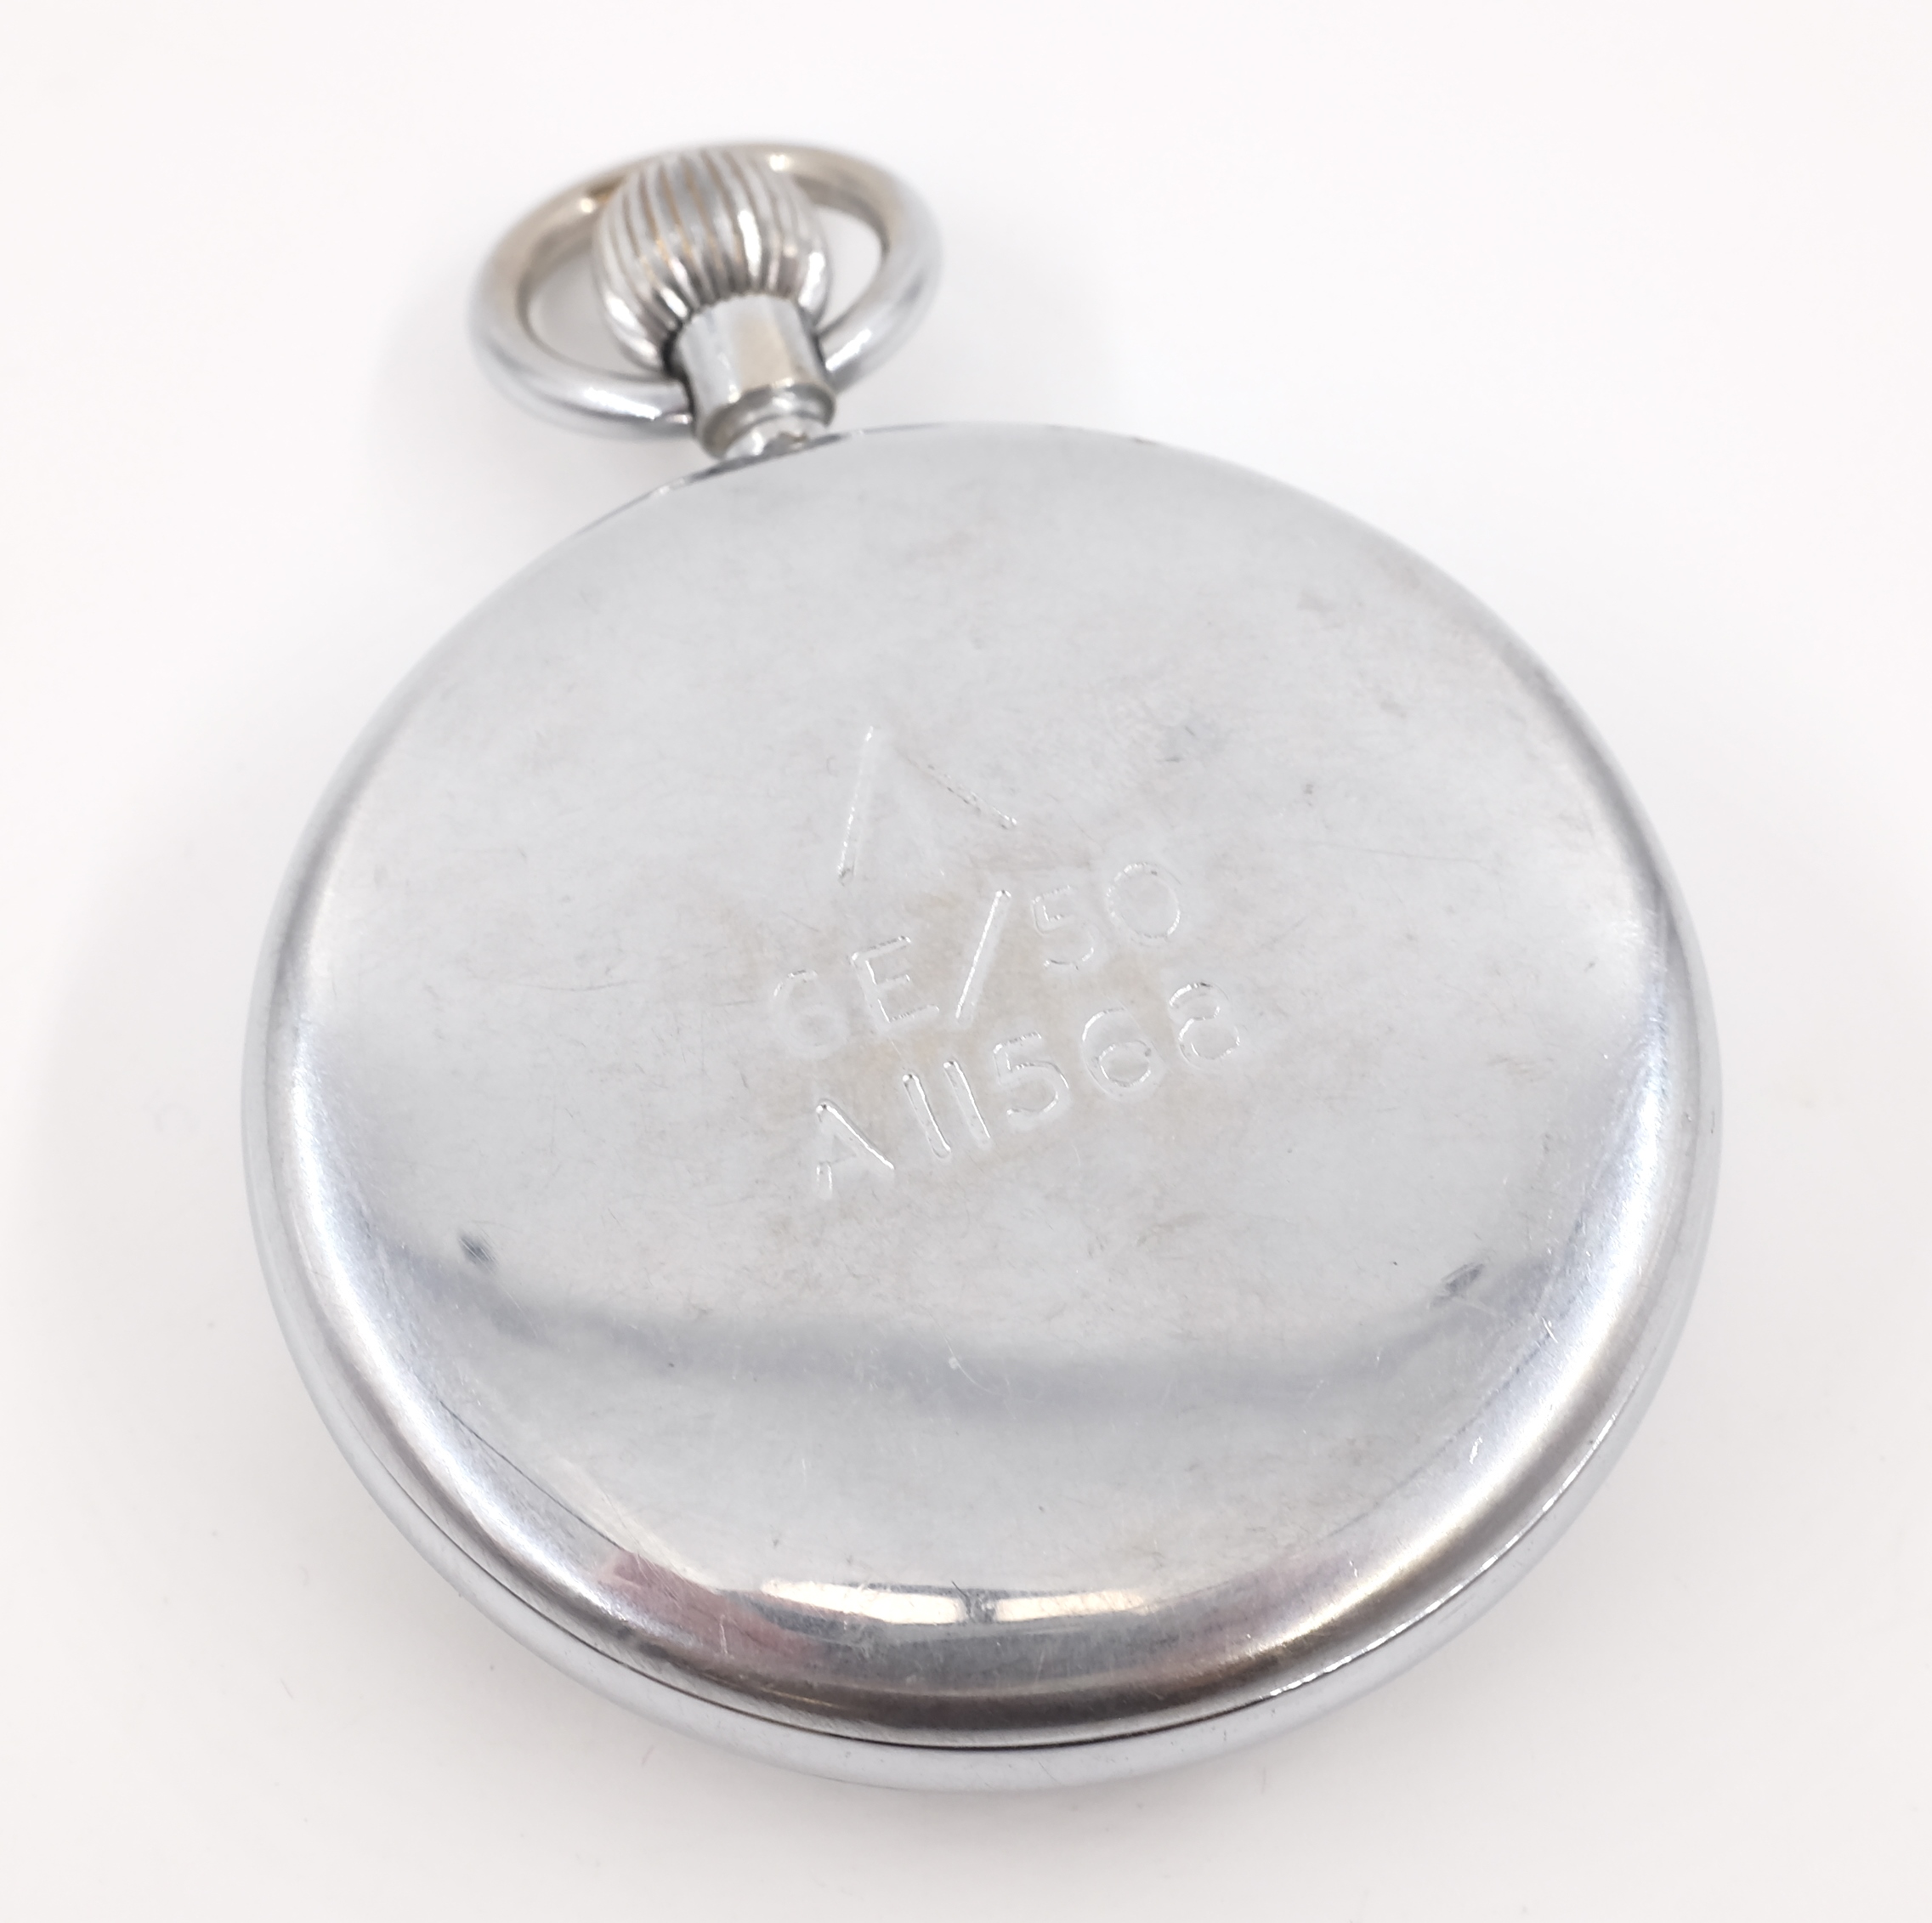 Jaeger-Le Coultre WWII RAF engineers military pocket watch arrow mark 6E/50 A11568 - Image 2 of 4